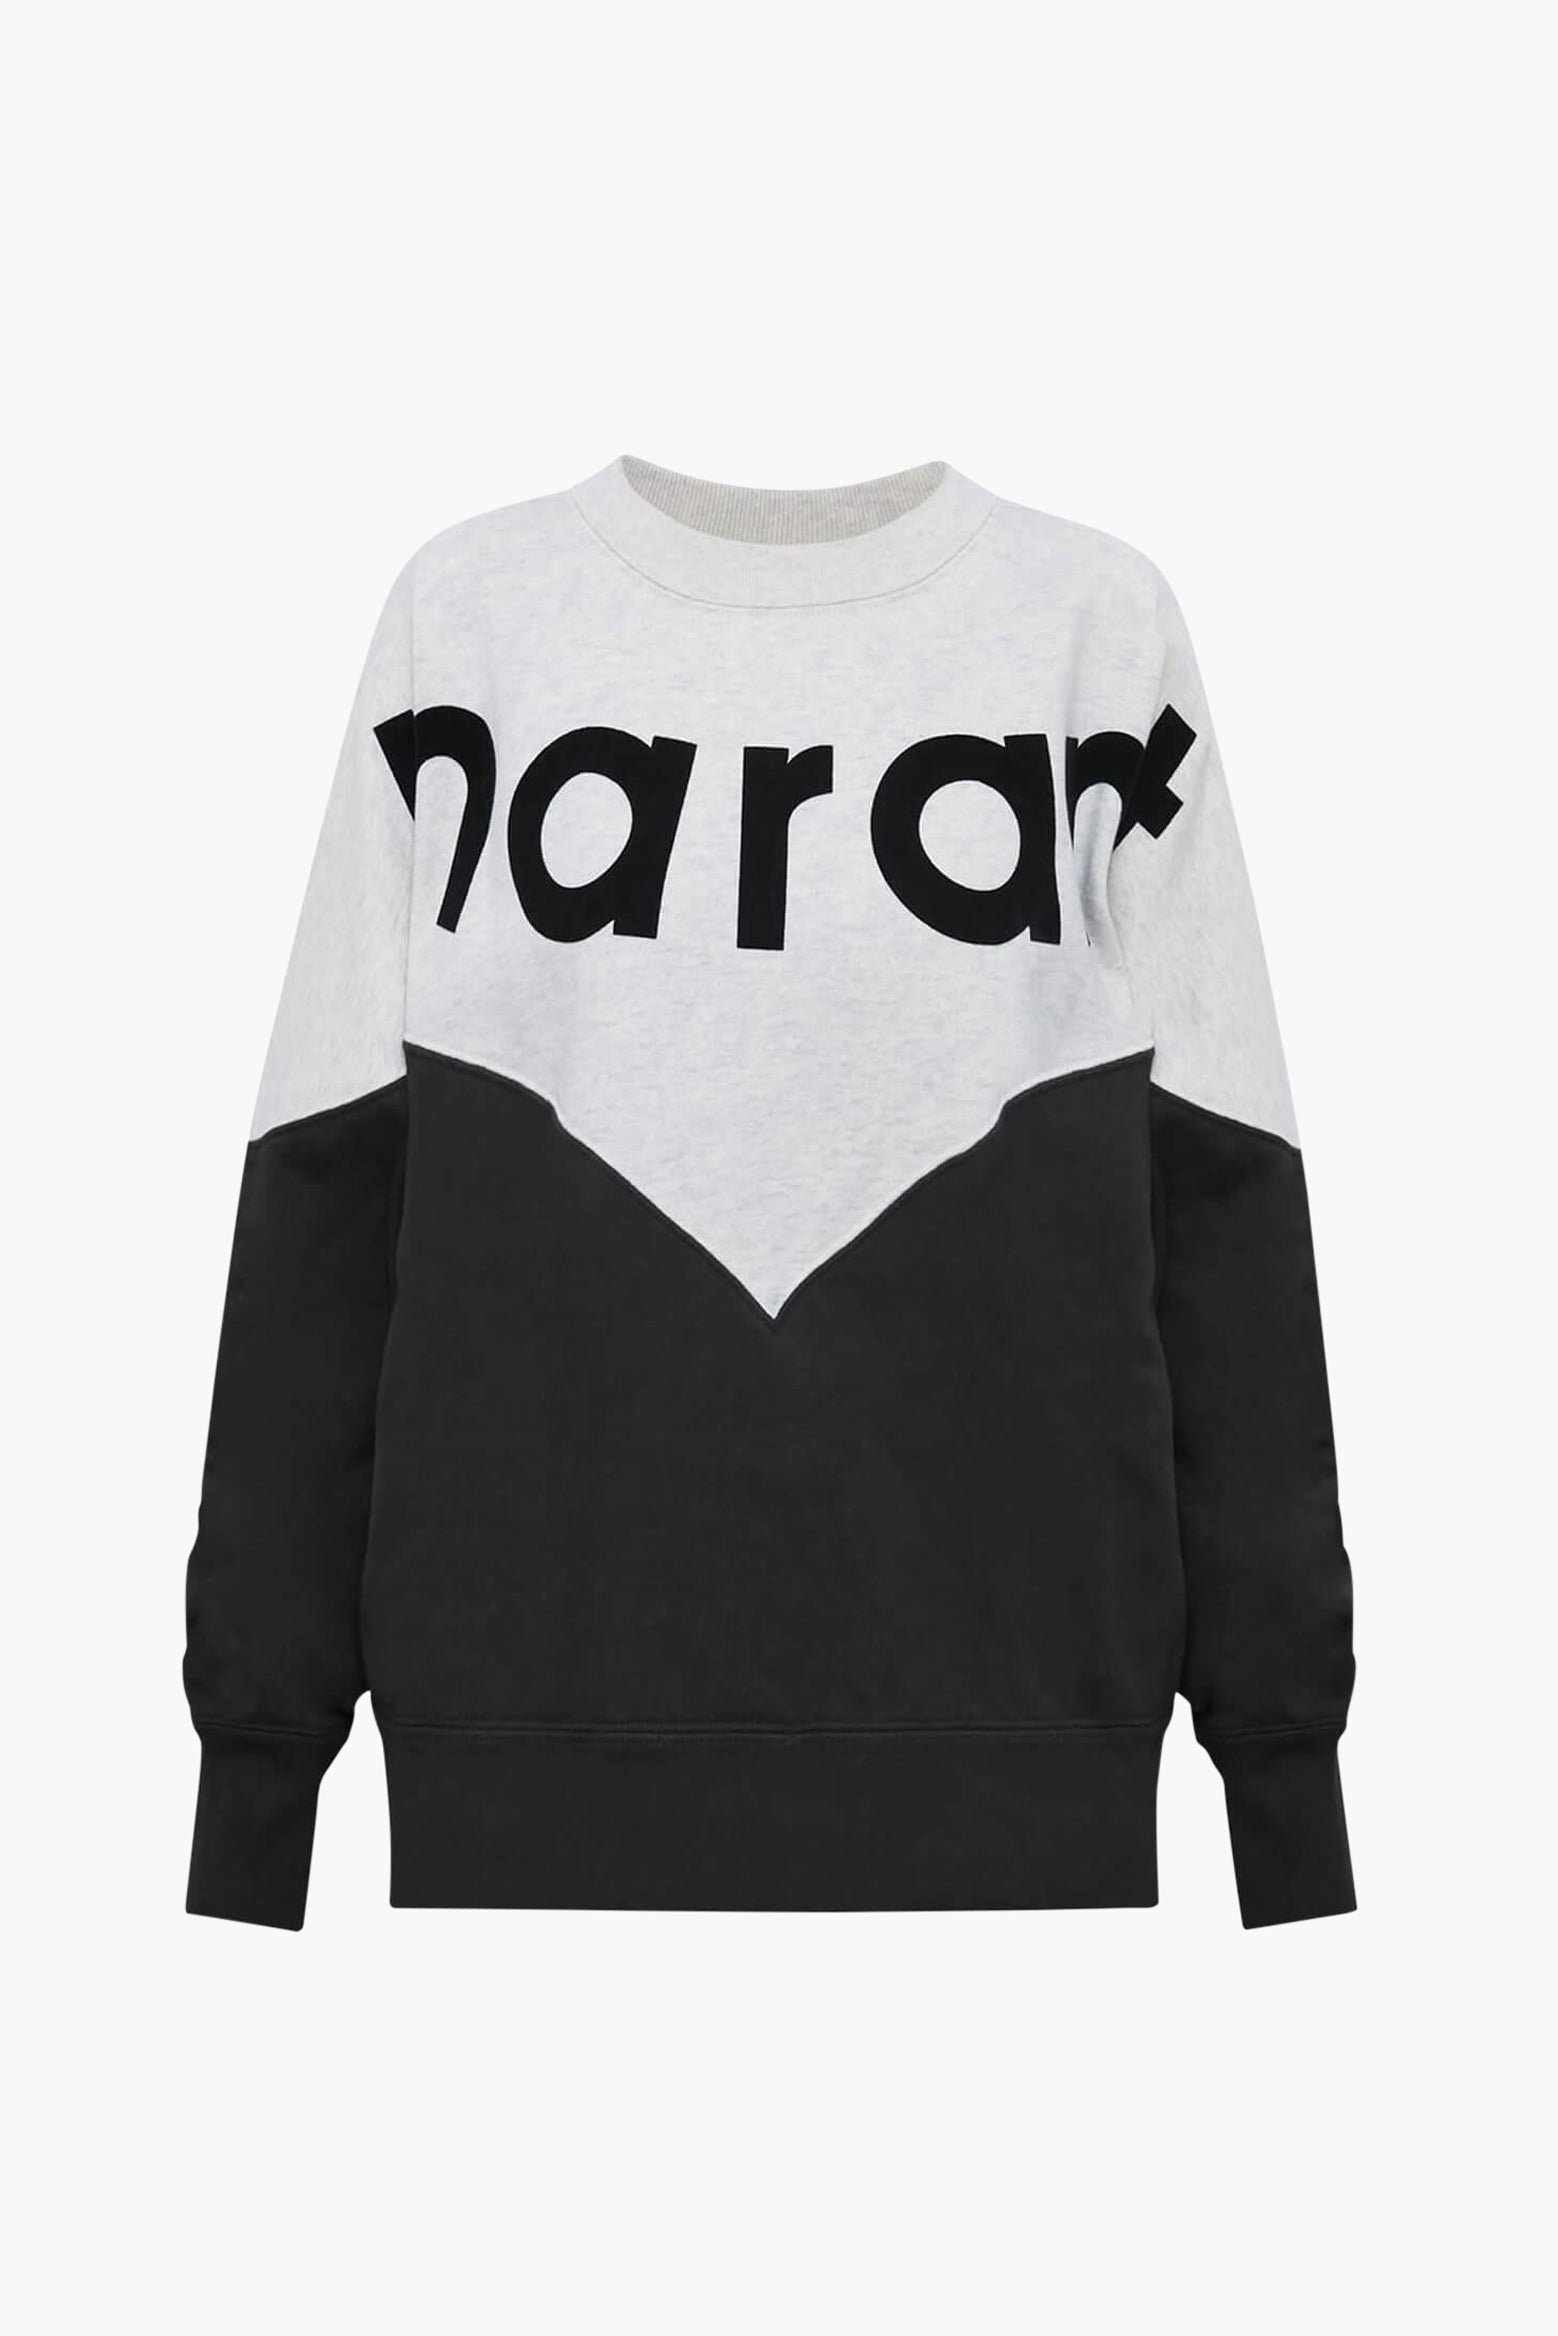 Isabel Marant Étoile Houston Sweatshirt in Faded Black from The New Trend